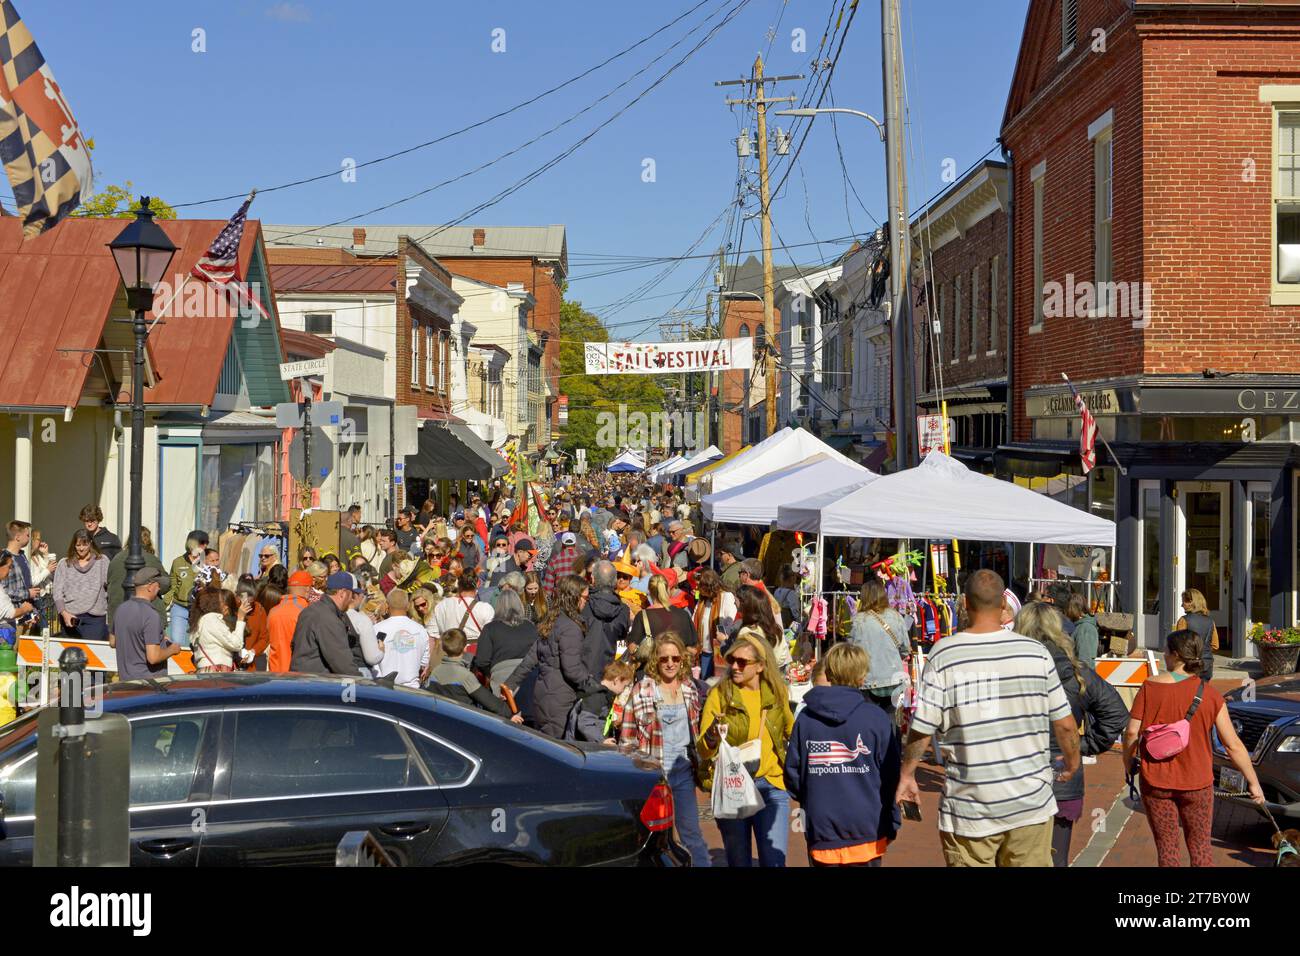 People enjoying the Fall Festival on Maryland Street in Annapolis MD Stock Photo